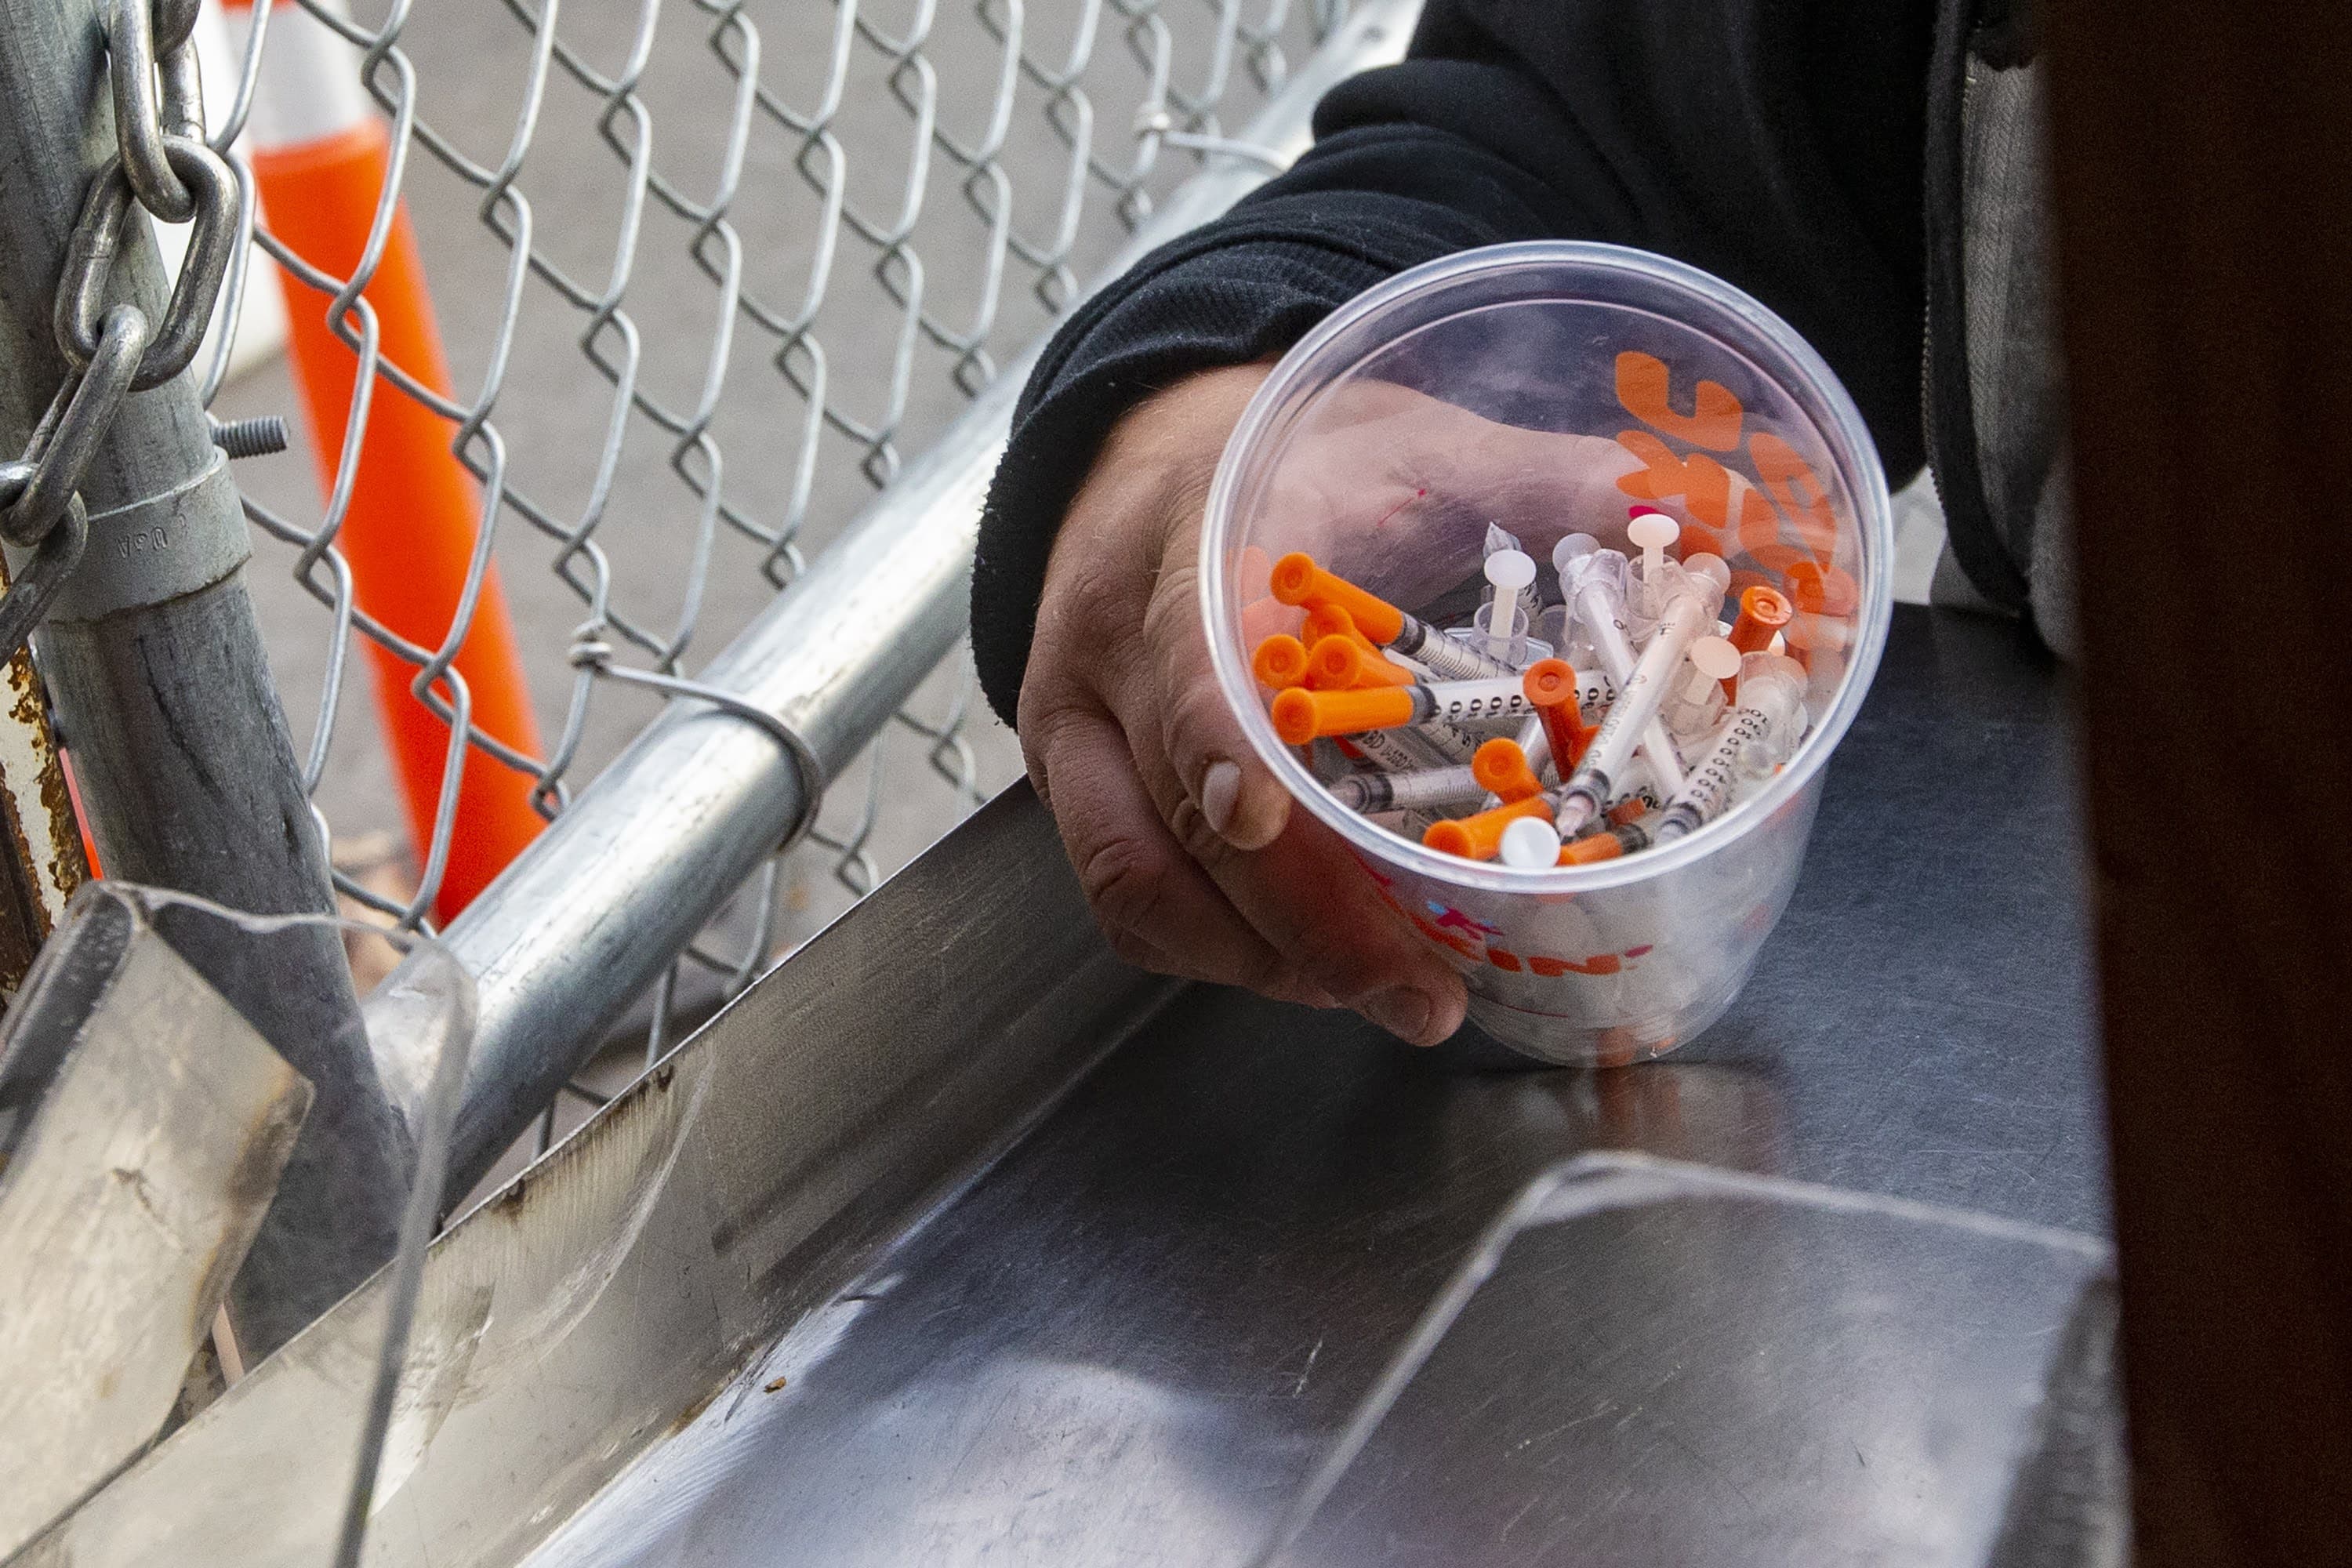 A man prepares to dump out a cup full of syringes at onto the counter as part of a syringe buy-back project in Boston run by the Community Syringe Redemption Program. (Jesse Costa/WBUR)